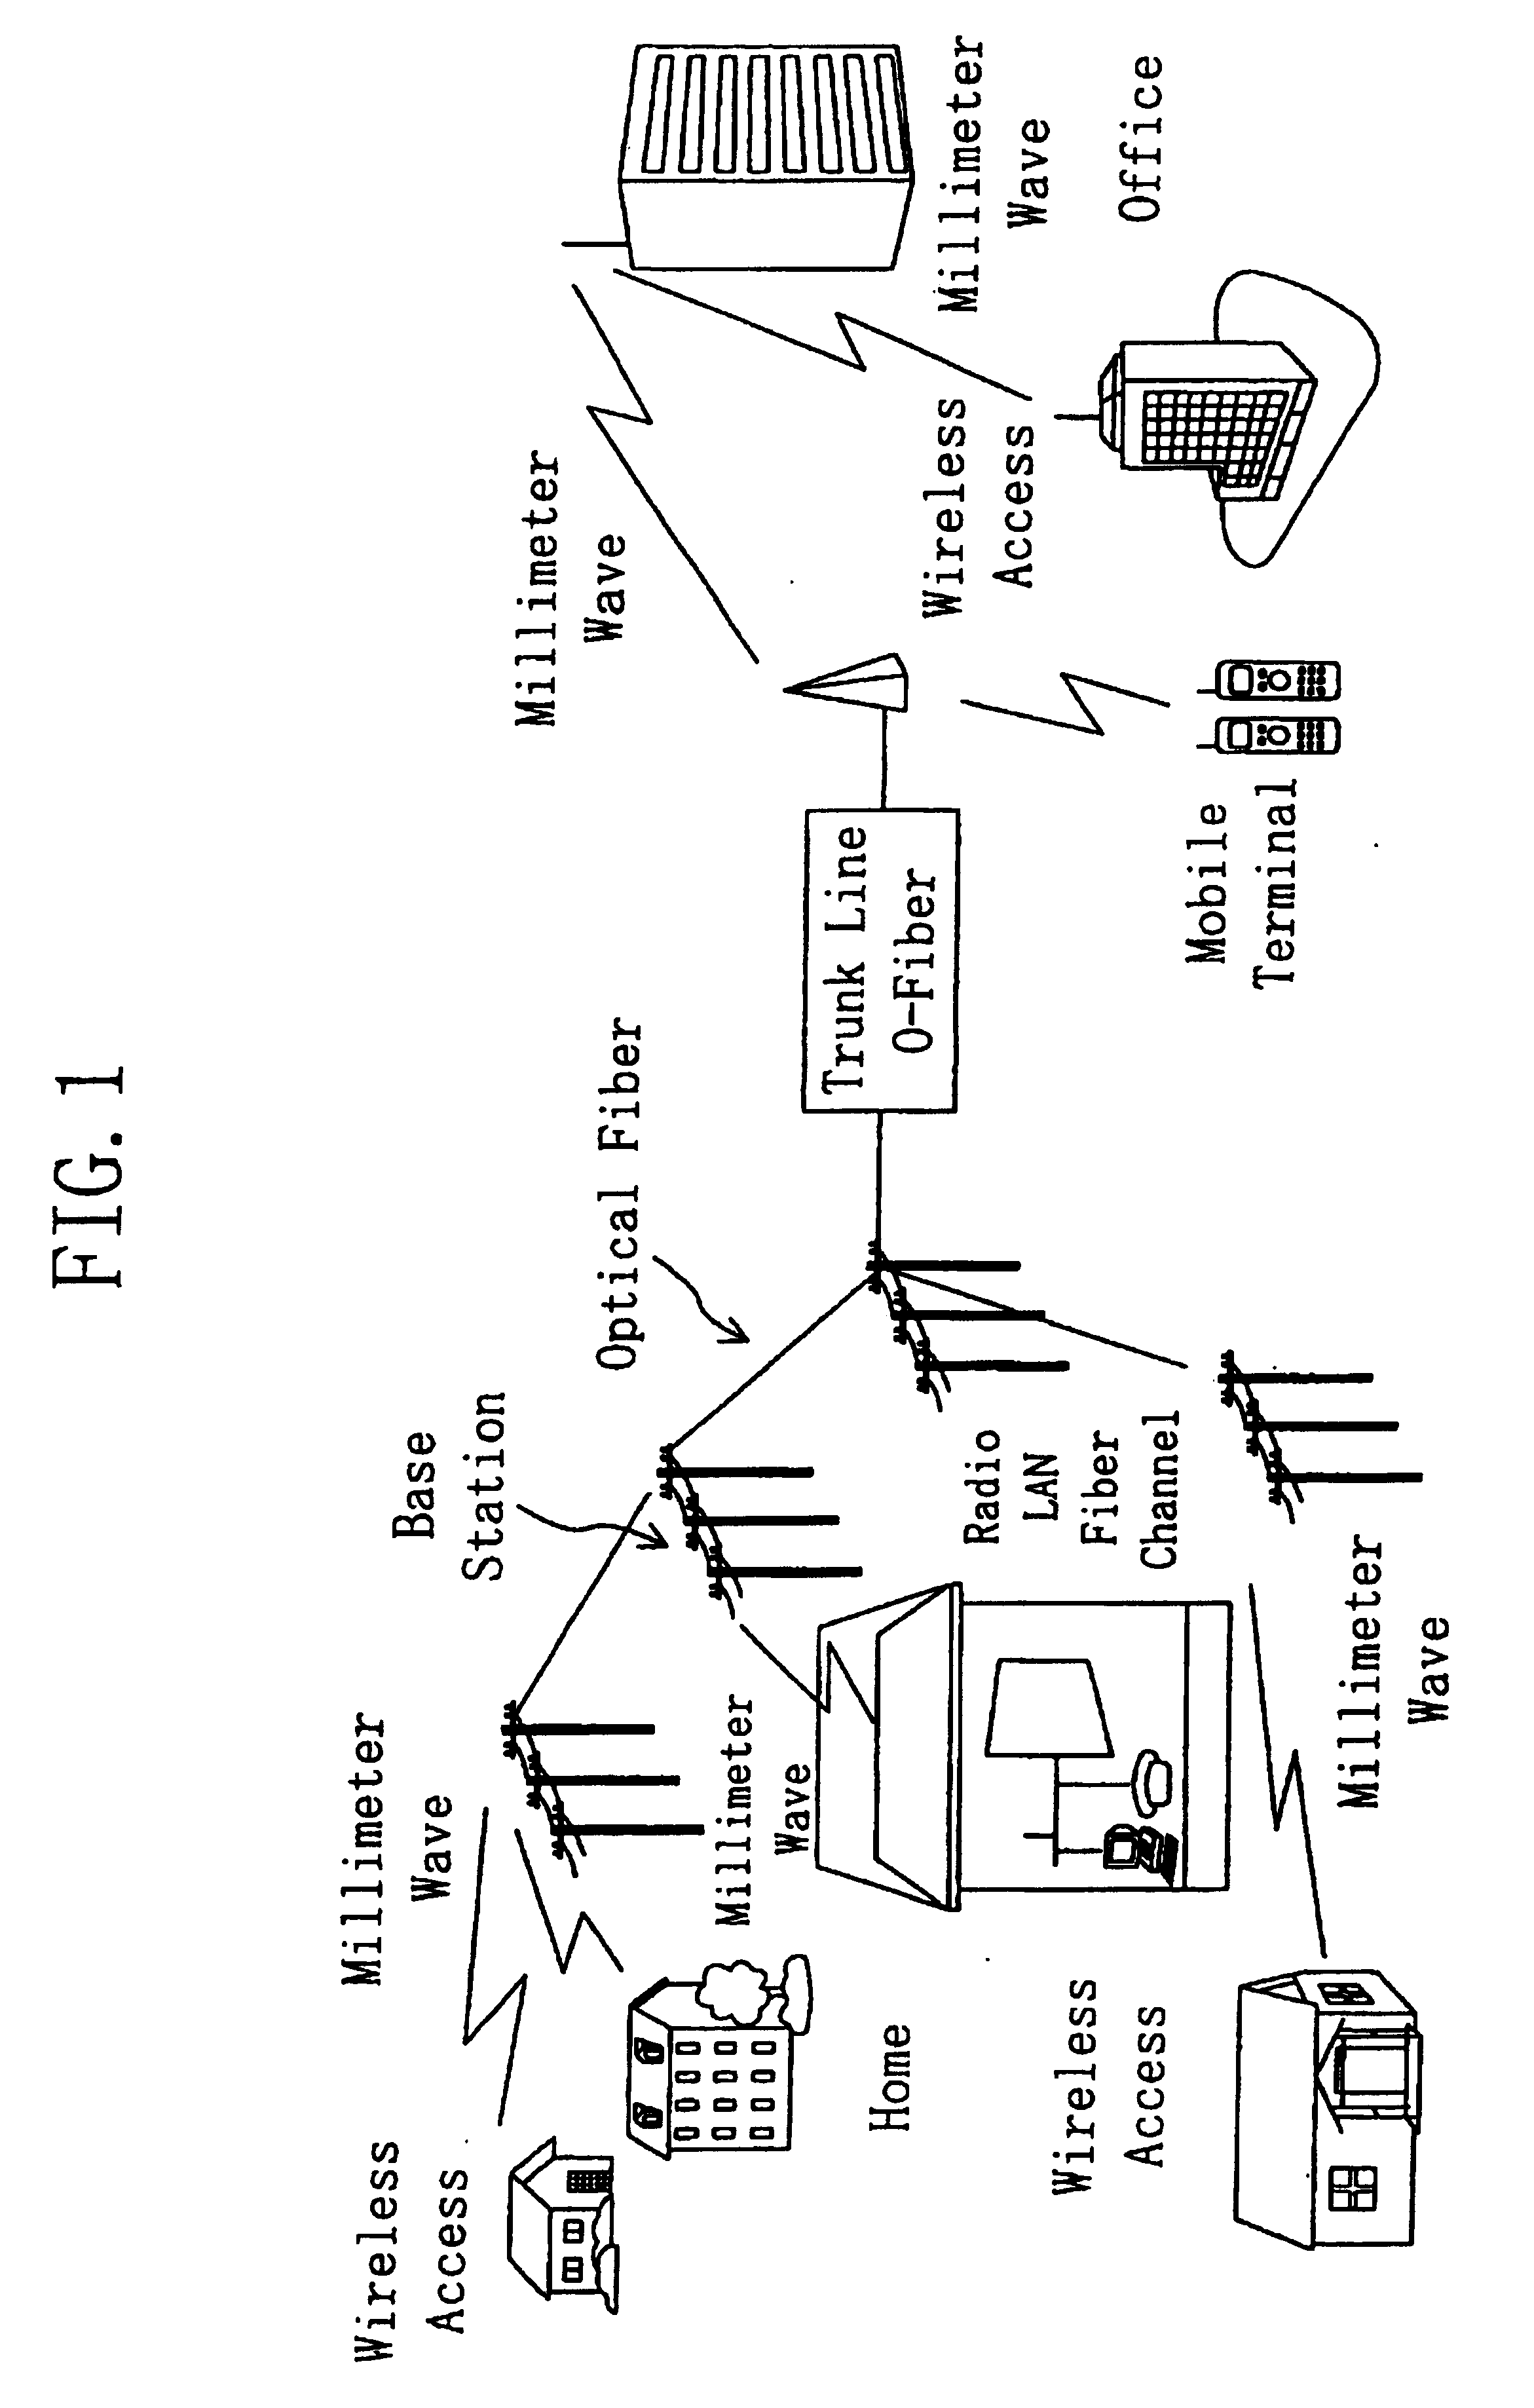 Semiconductor device having a high breakdown voltage for use in communication systems